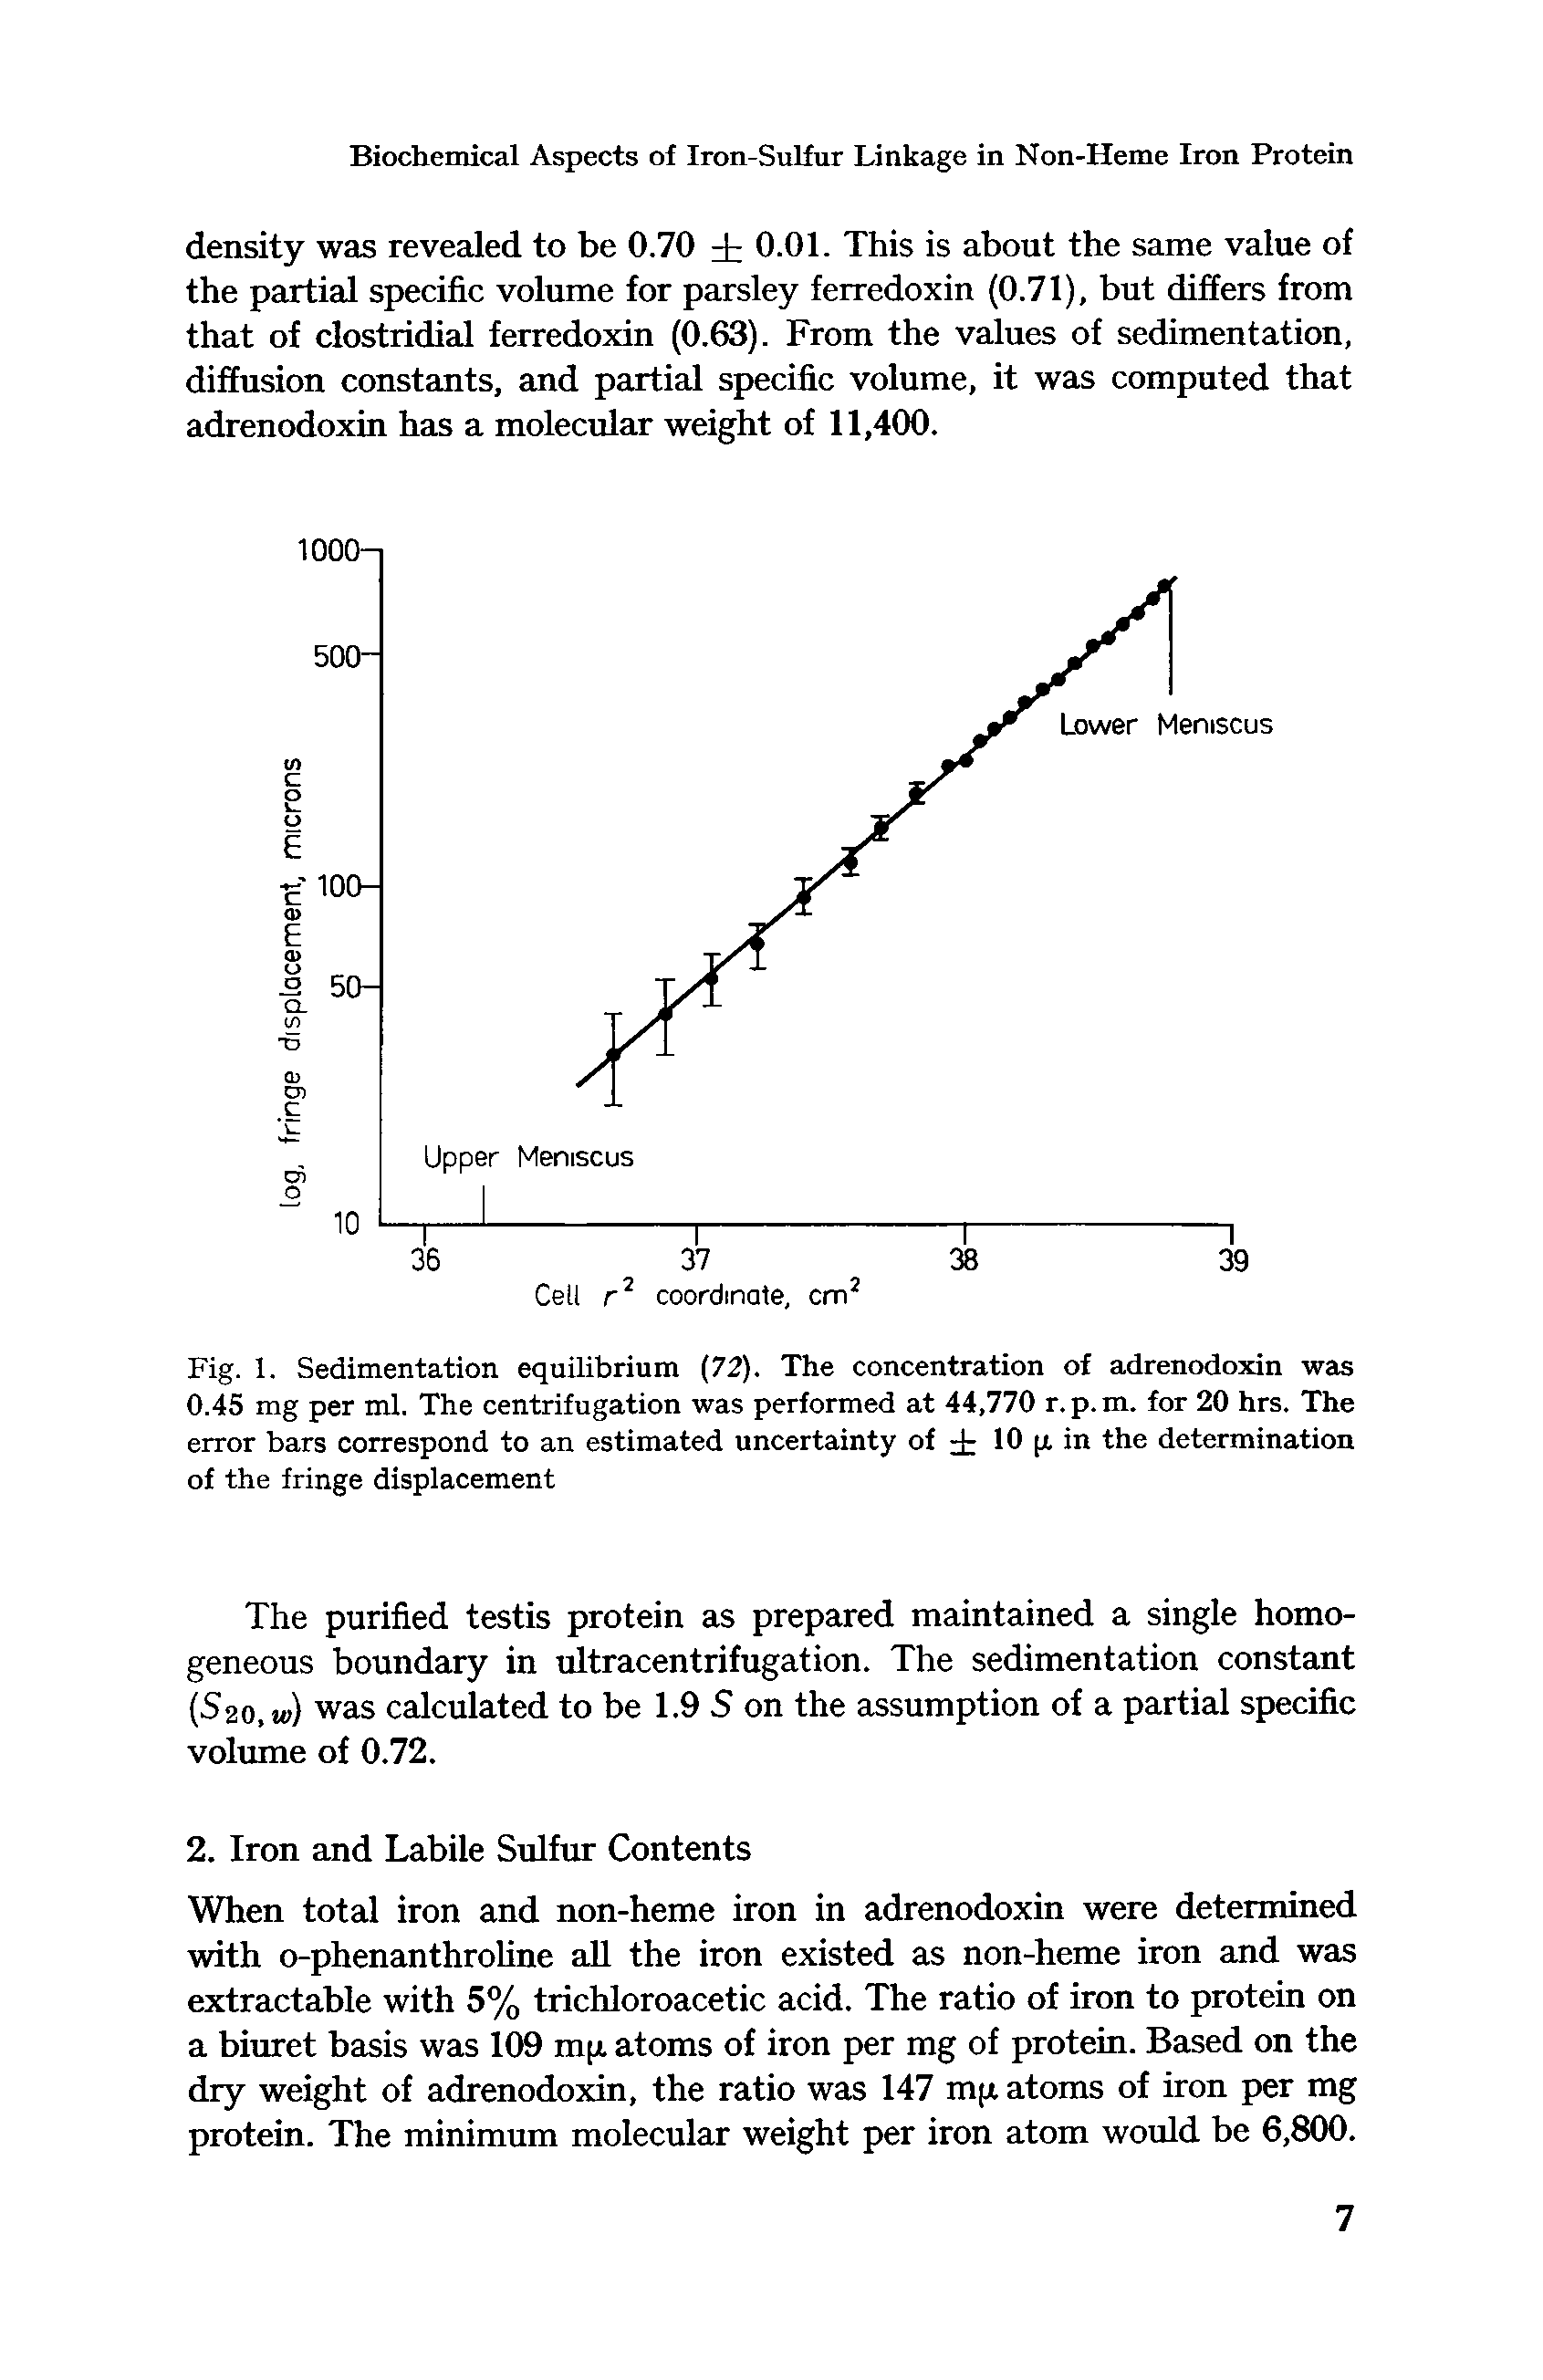 Fig. 1. Sedimentation equilibrium (72). The concentration of adrenodoxin was 0.45 mg per ml. The centrifugation was performed at 44,770 r.p.m. for 20 hrs. The error bars correspond to an estimated uncertainty of 10 p. in the determination of the fringe displacement...